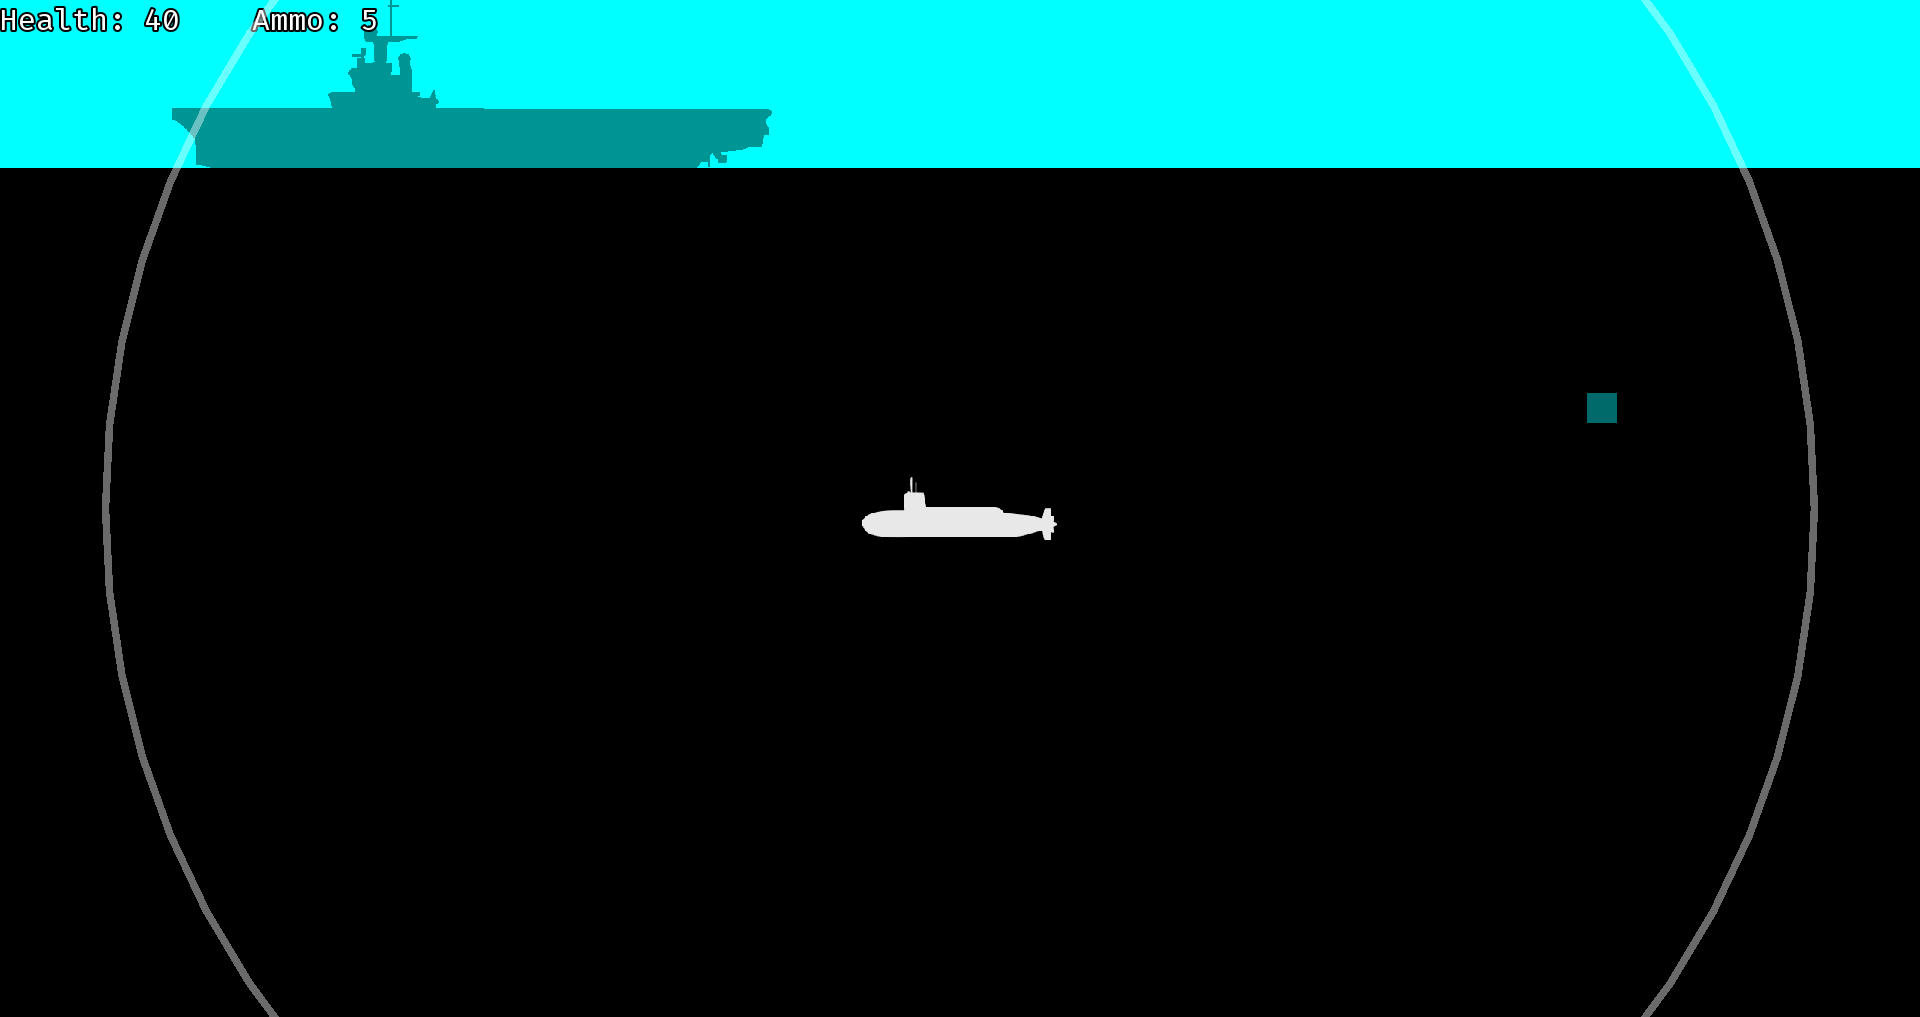 The player submarine locating a ship and some resources